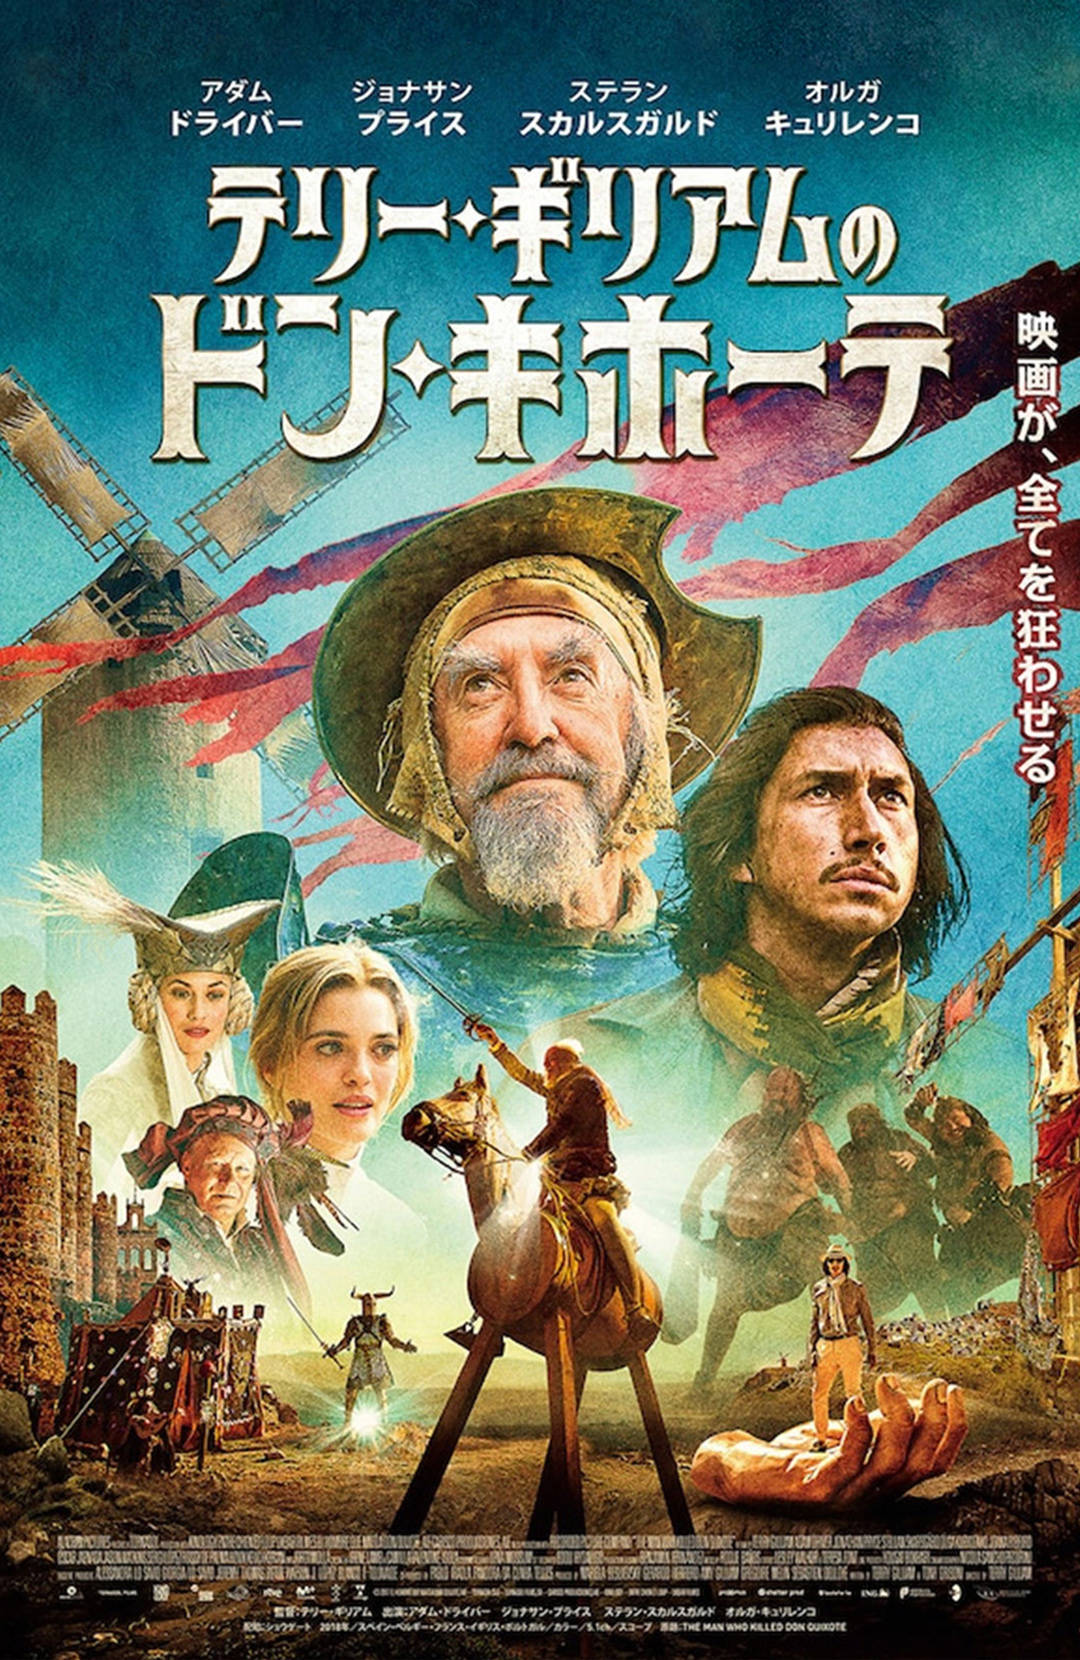 Terry Gilliam 's long-awaited film, "The Man Who Killed Don Quixote", comes to Japan January 24.